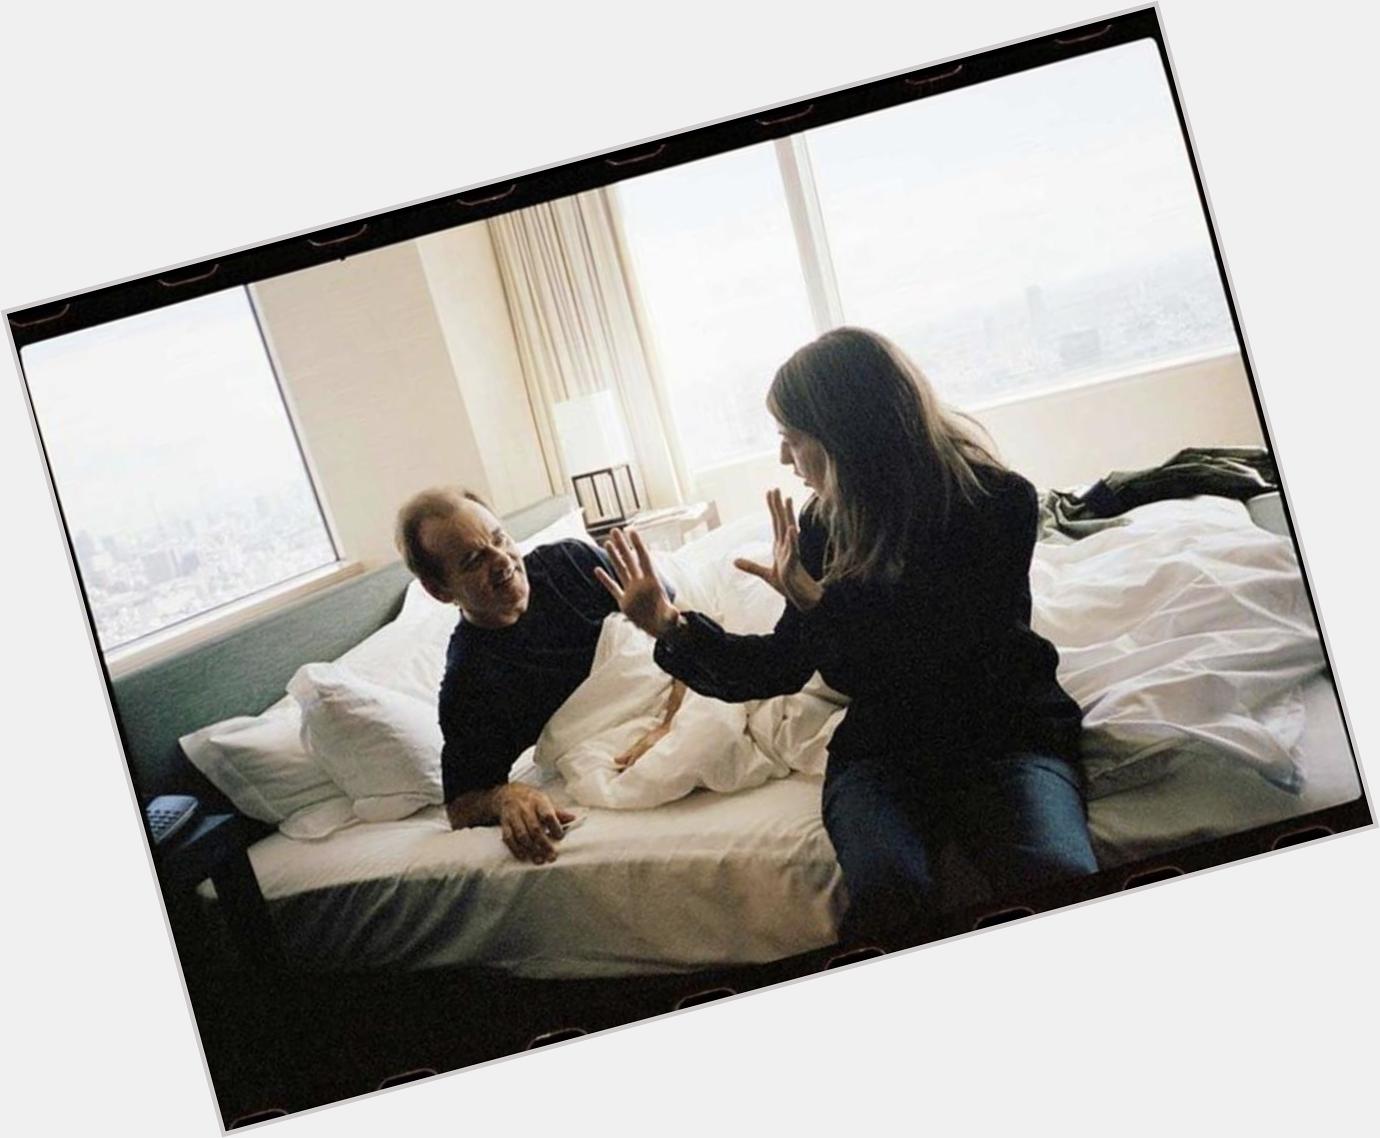 Happy birthday Sofia Coppola, seen here on the set of Lost in Translation with Bill Murray. 